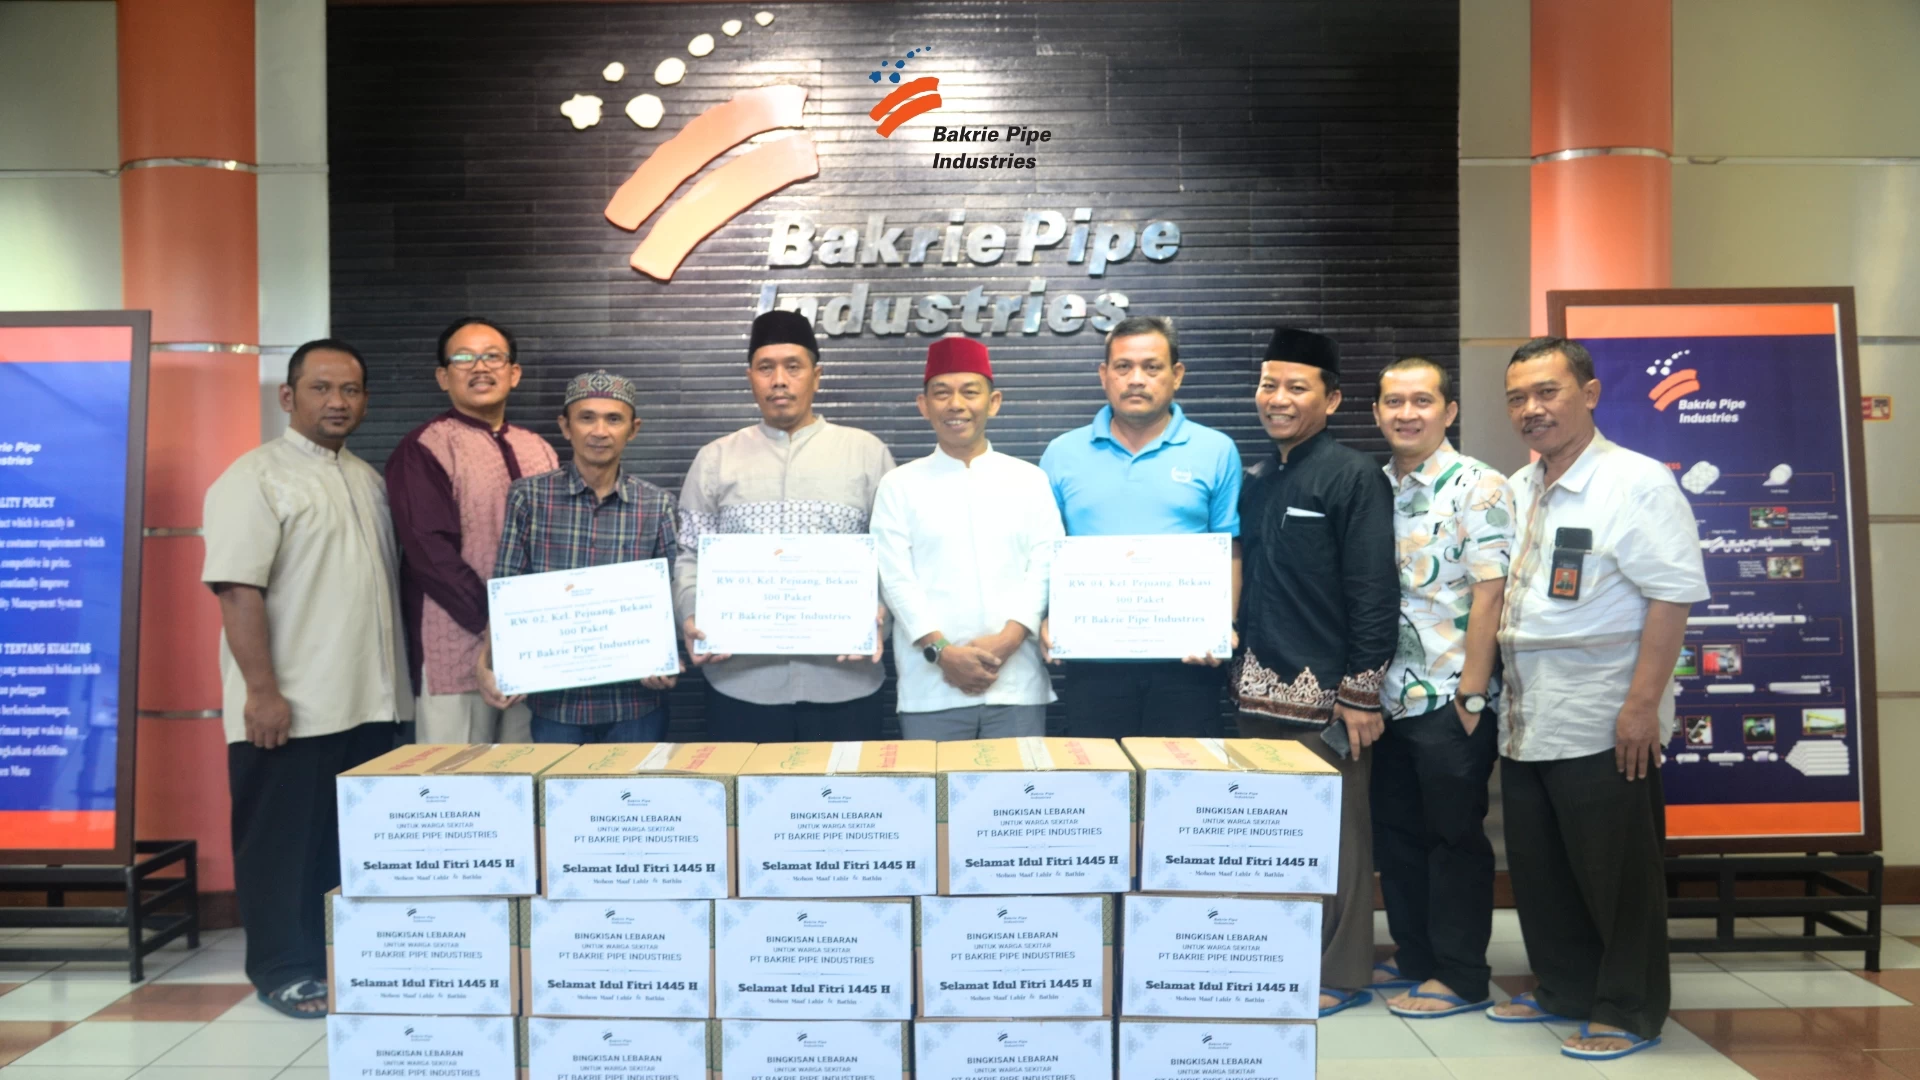 PT Bakrie Pipe Industries Held an Iftar Gathering with All Employees, Orphans, and the Surrounding Community